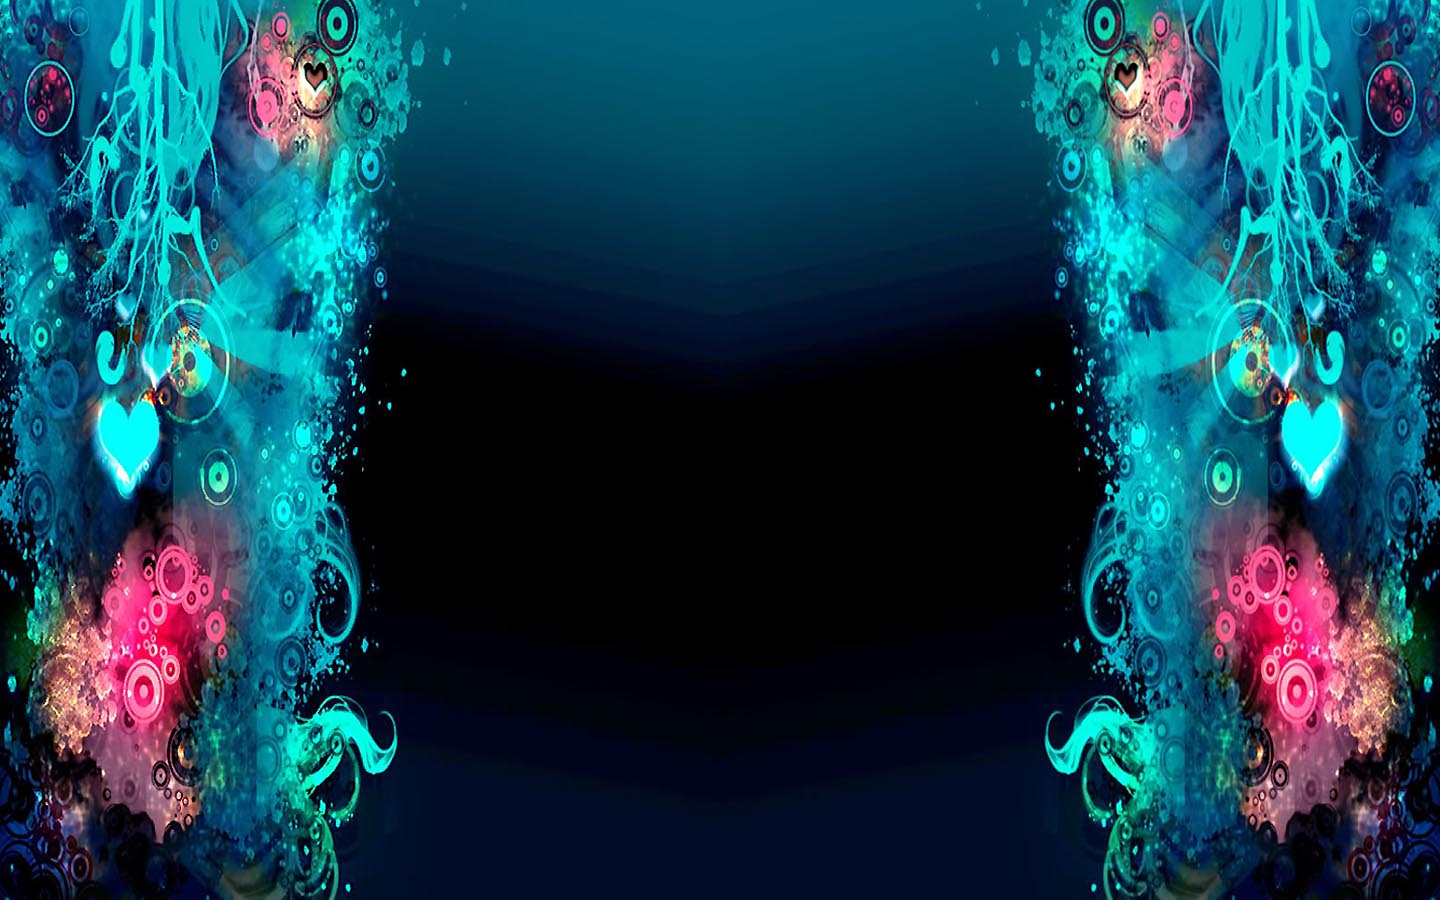 Under The Sea Background Themes